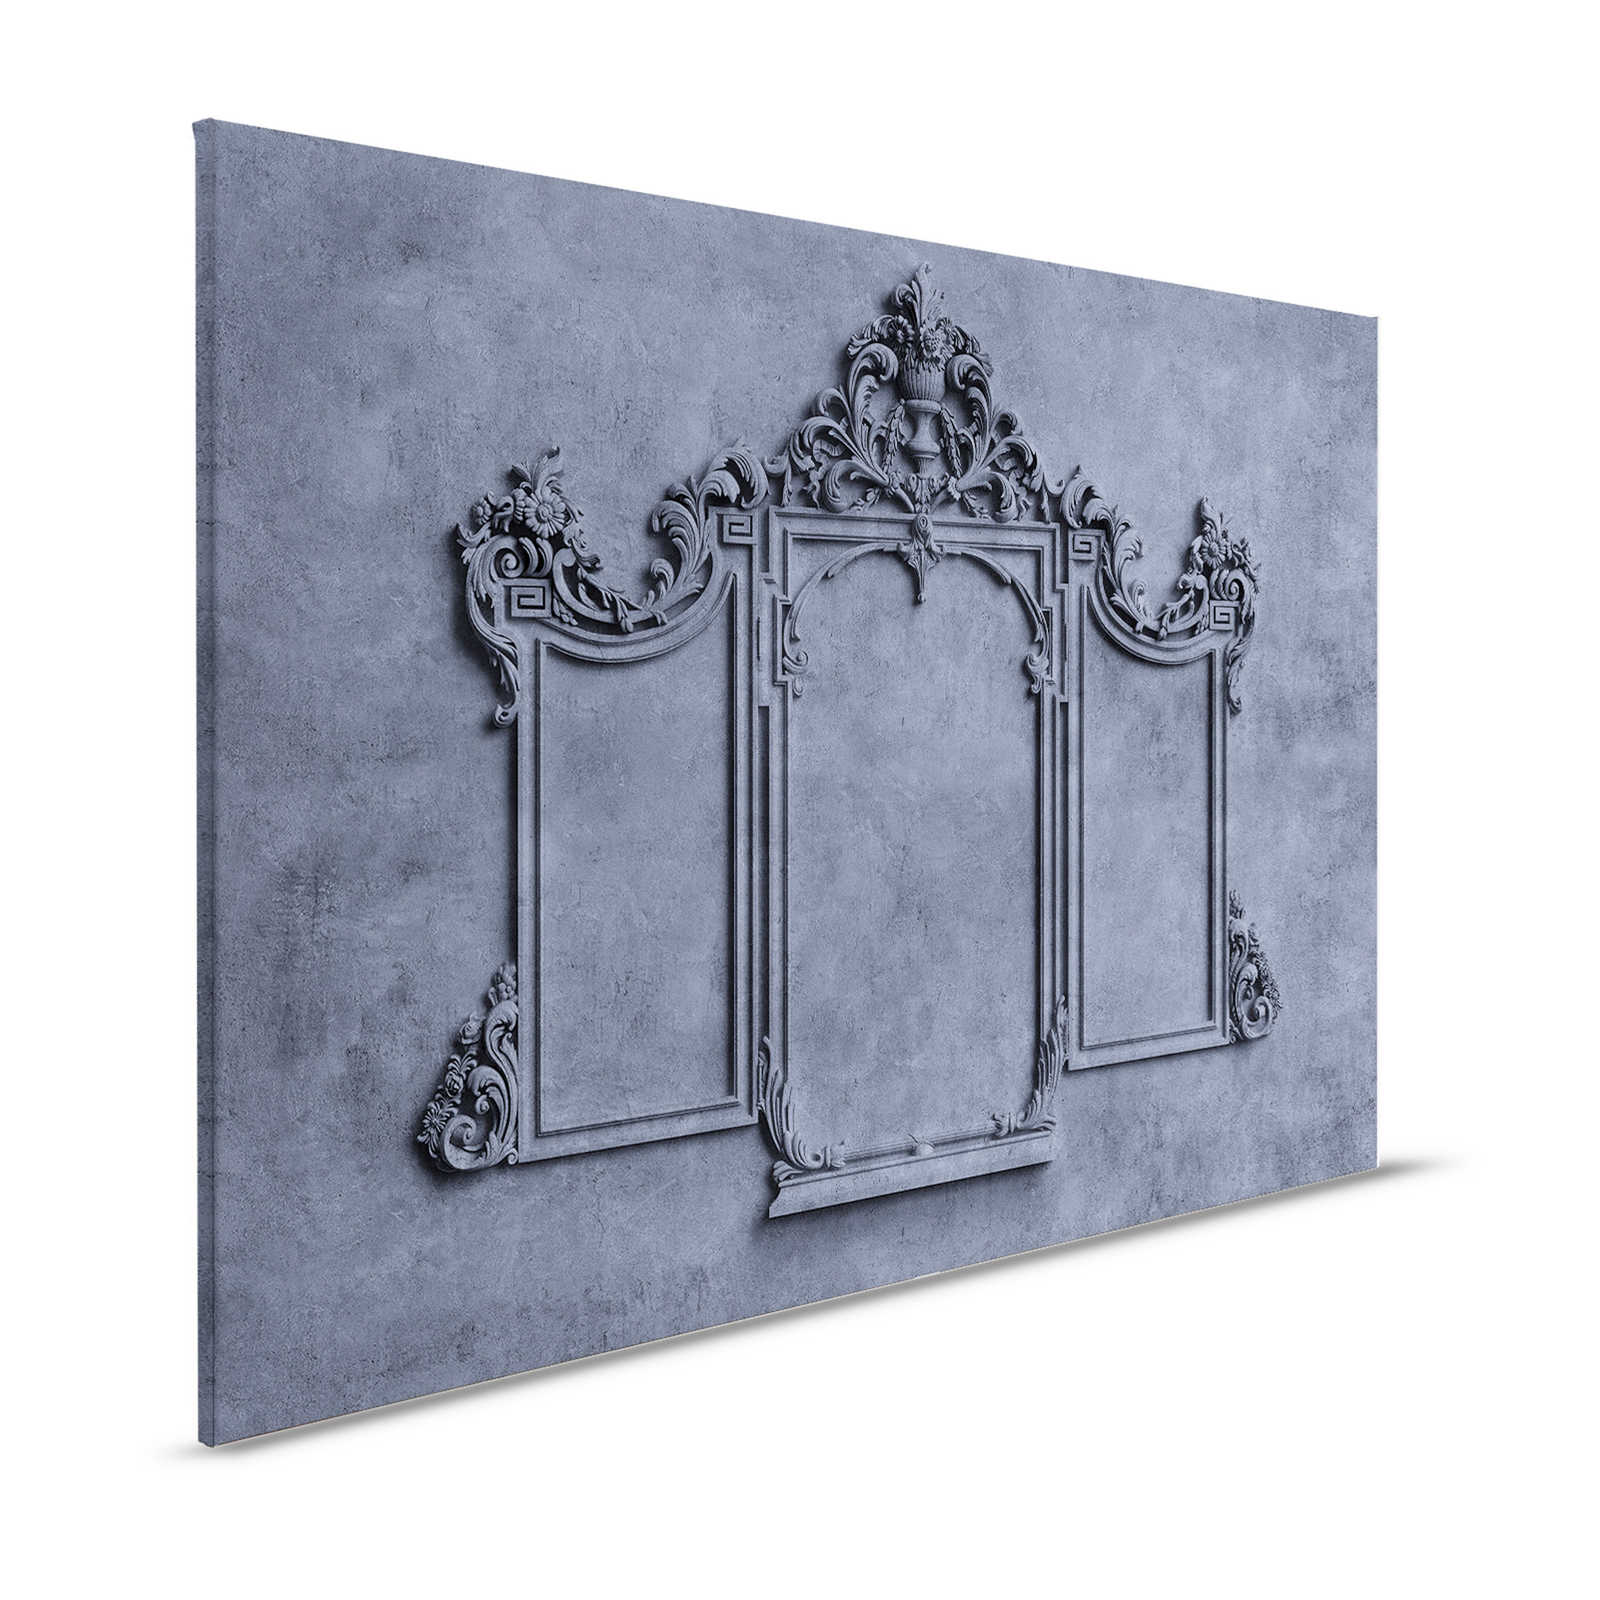 Lyon 3 - Canvas painting 3D stucco picture frame & plaster look in blue - 1.20 m x 0.80 m
